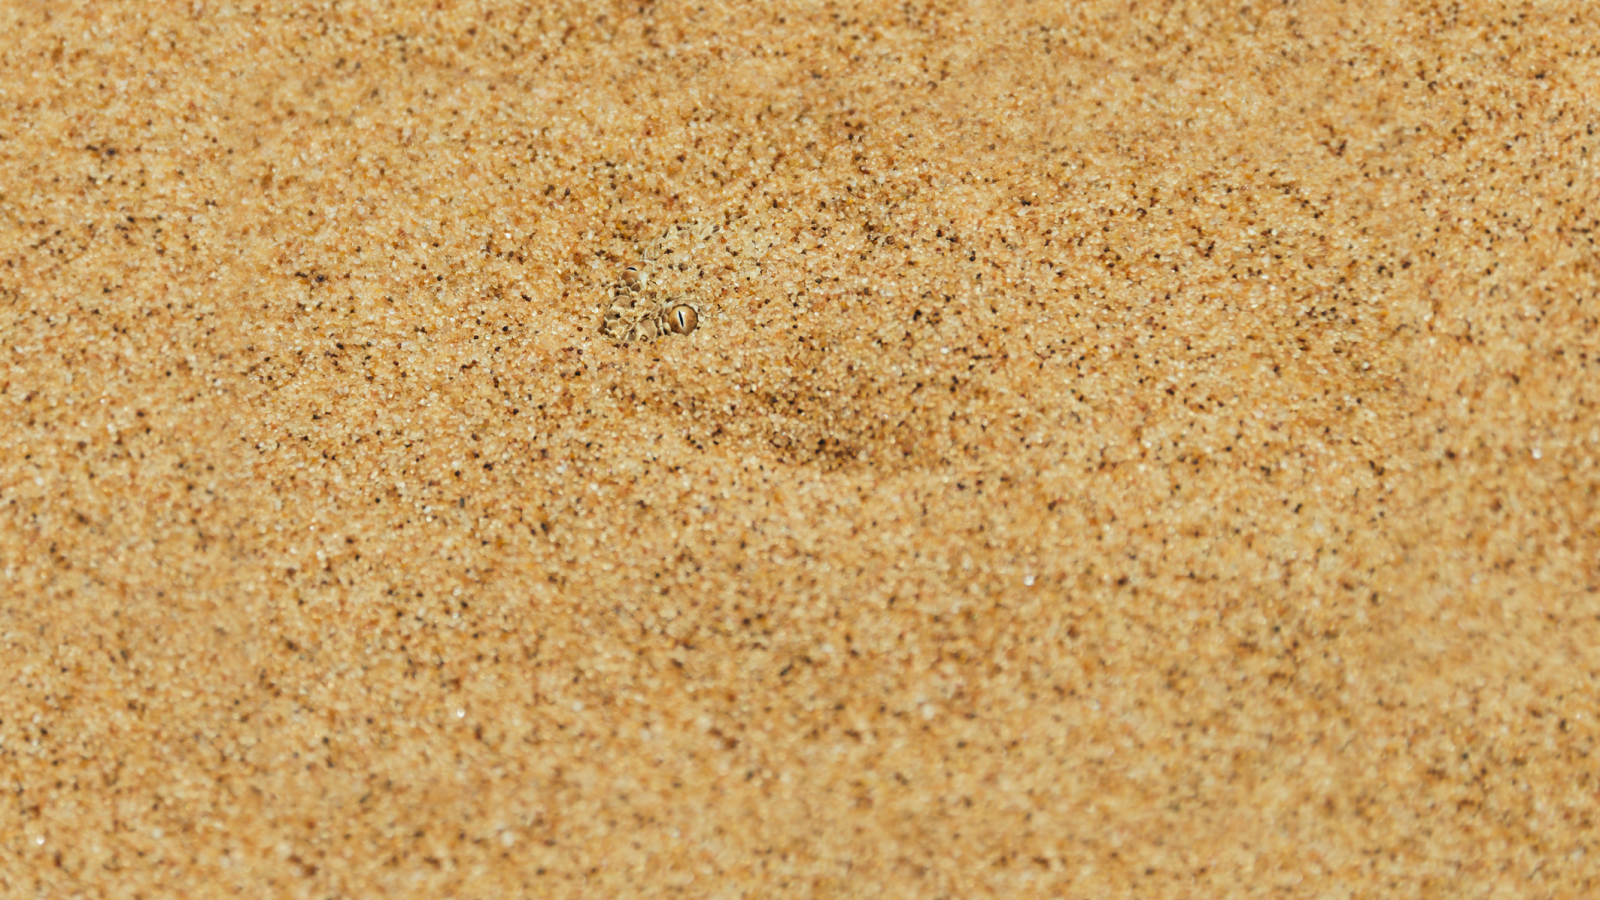 A horned rattlesnake hidden under the sand with only its eye peaking out from underneath.